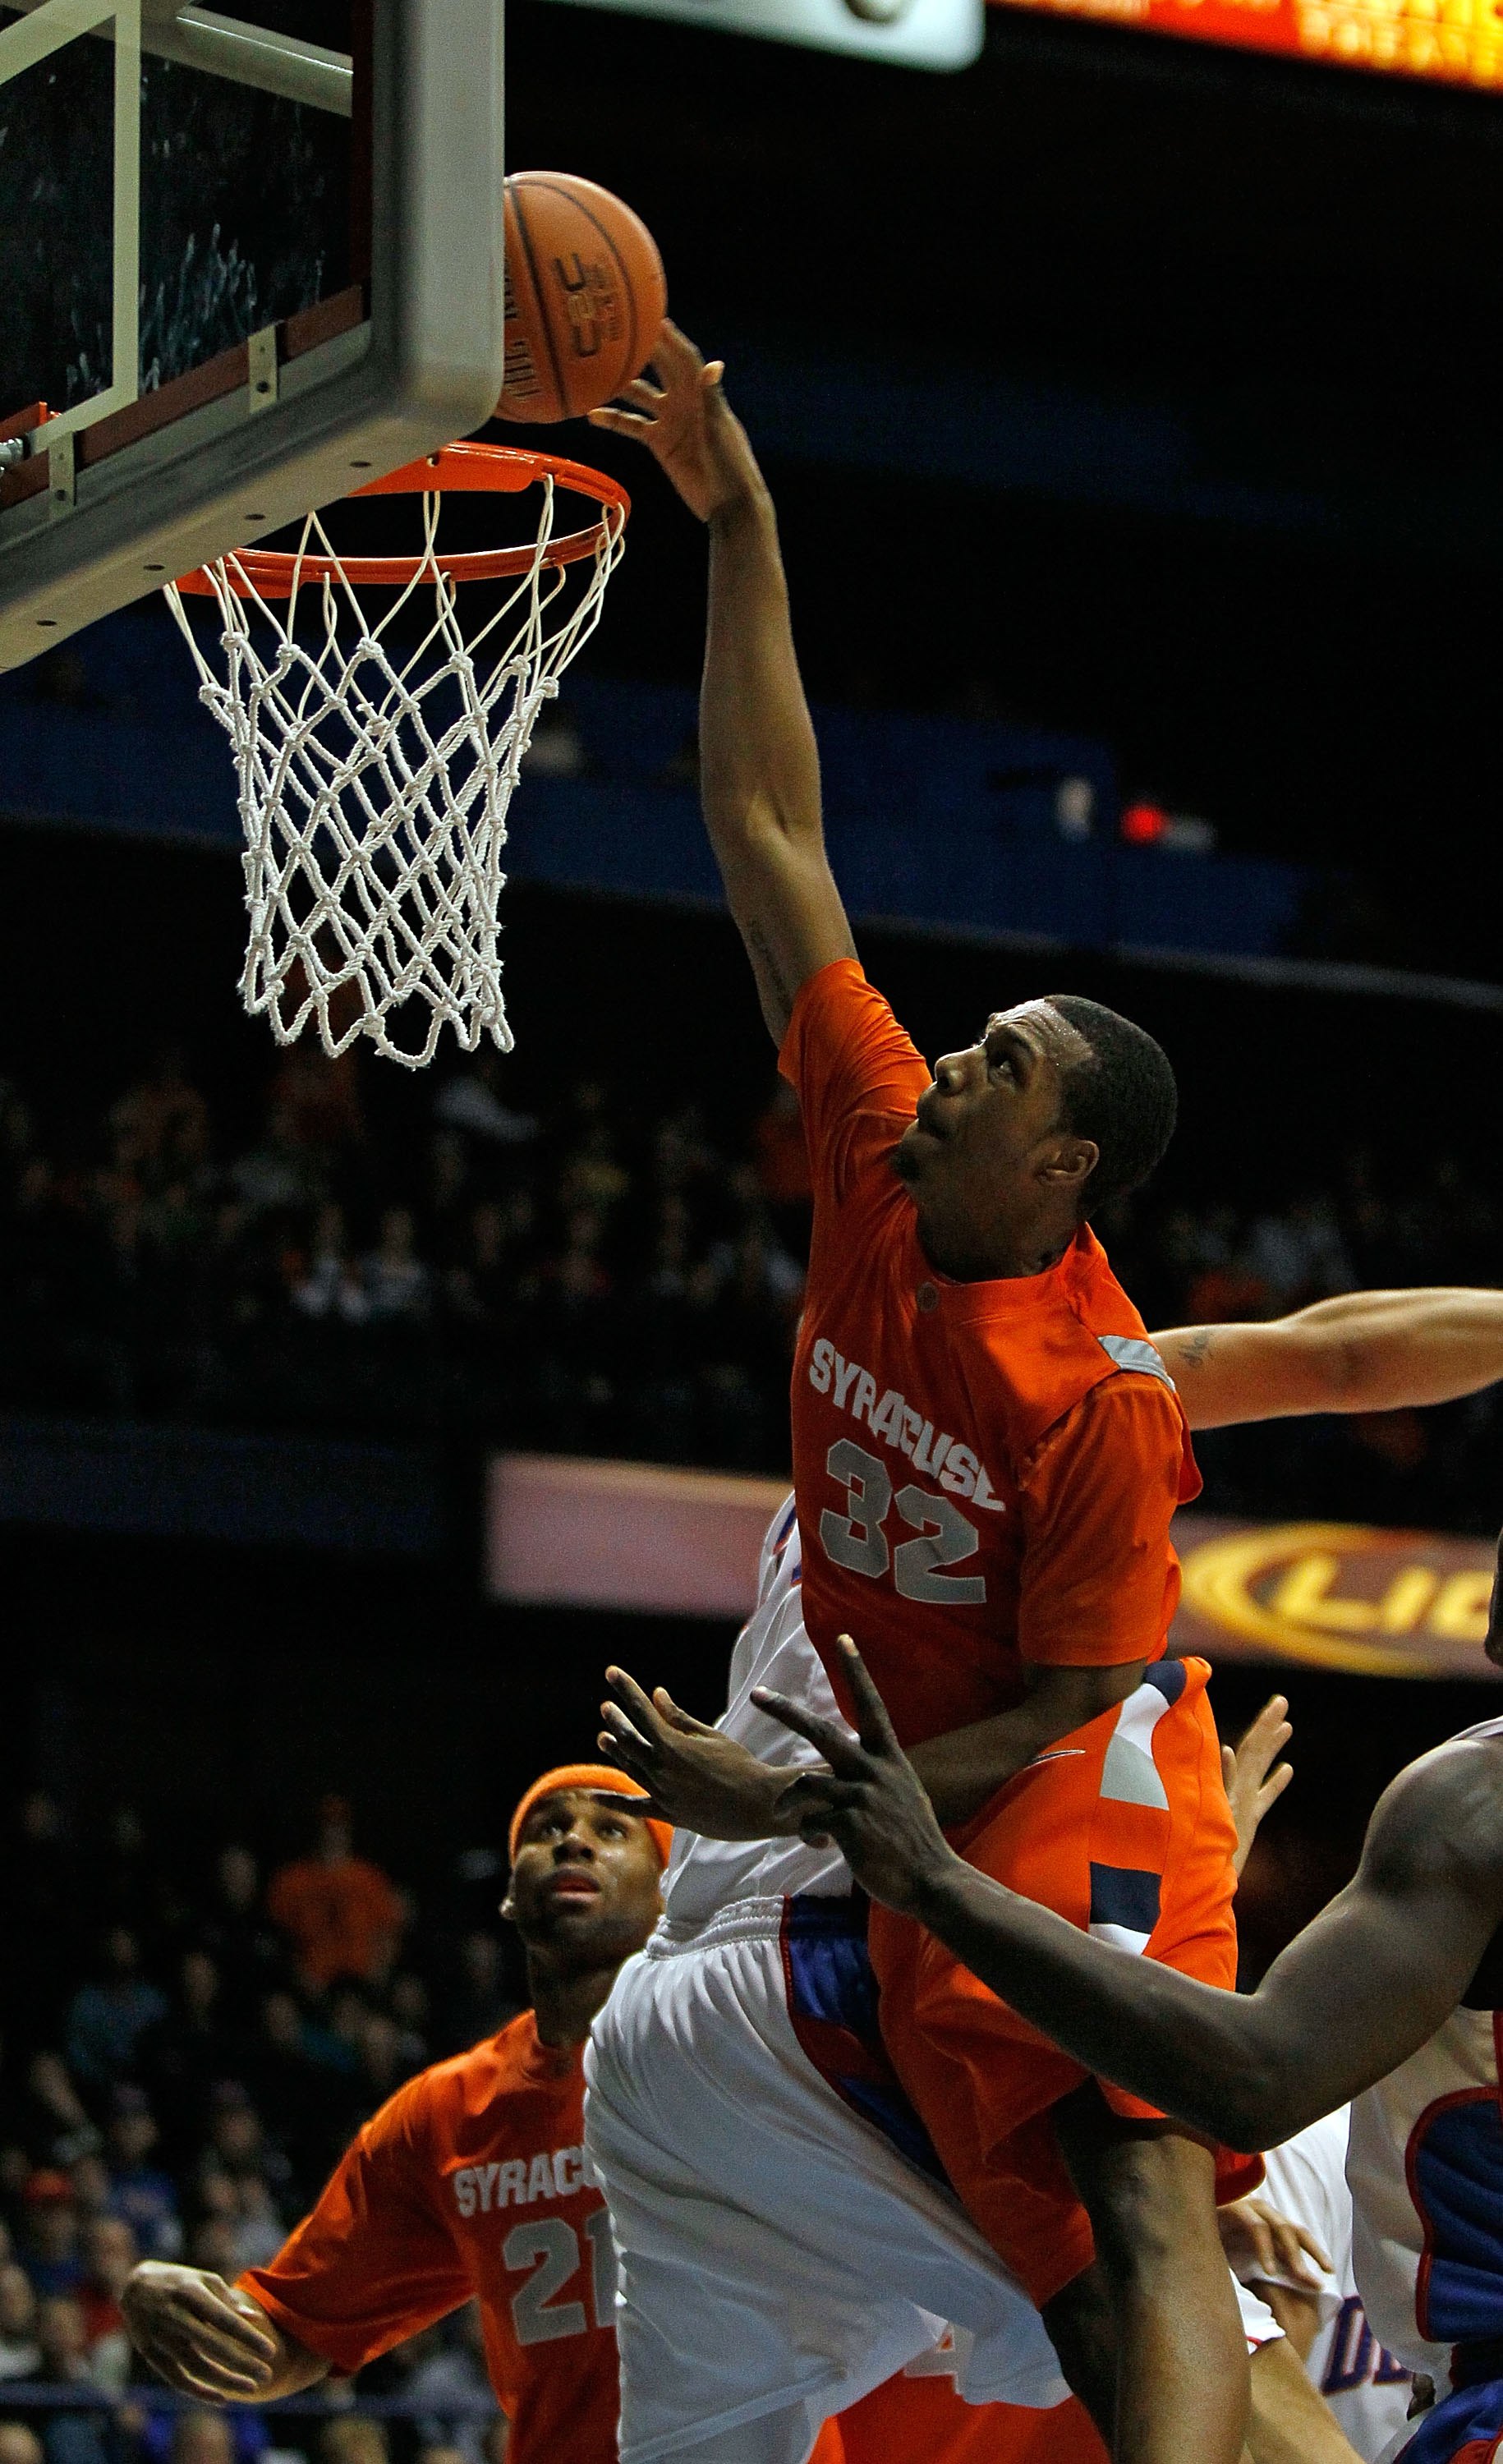 ROSEMONT, IL - JANUARY 30: Kris Joseph #32 of the Syracuse Orange puts up a shot over Kris Faber #33 of the DePaul Blue Demons at the Allstate Arena on January 30, 2010 in Rosemont, Illinois. Syracuse defeated DePaul 59-57. (Photo by Jonathan Daniel/Getty